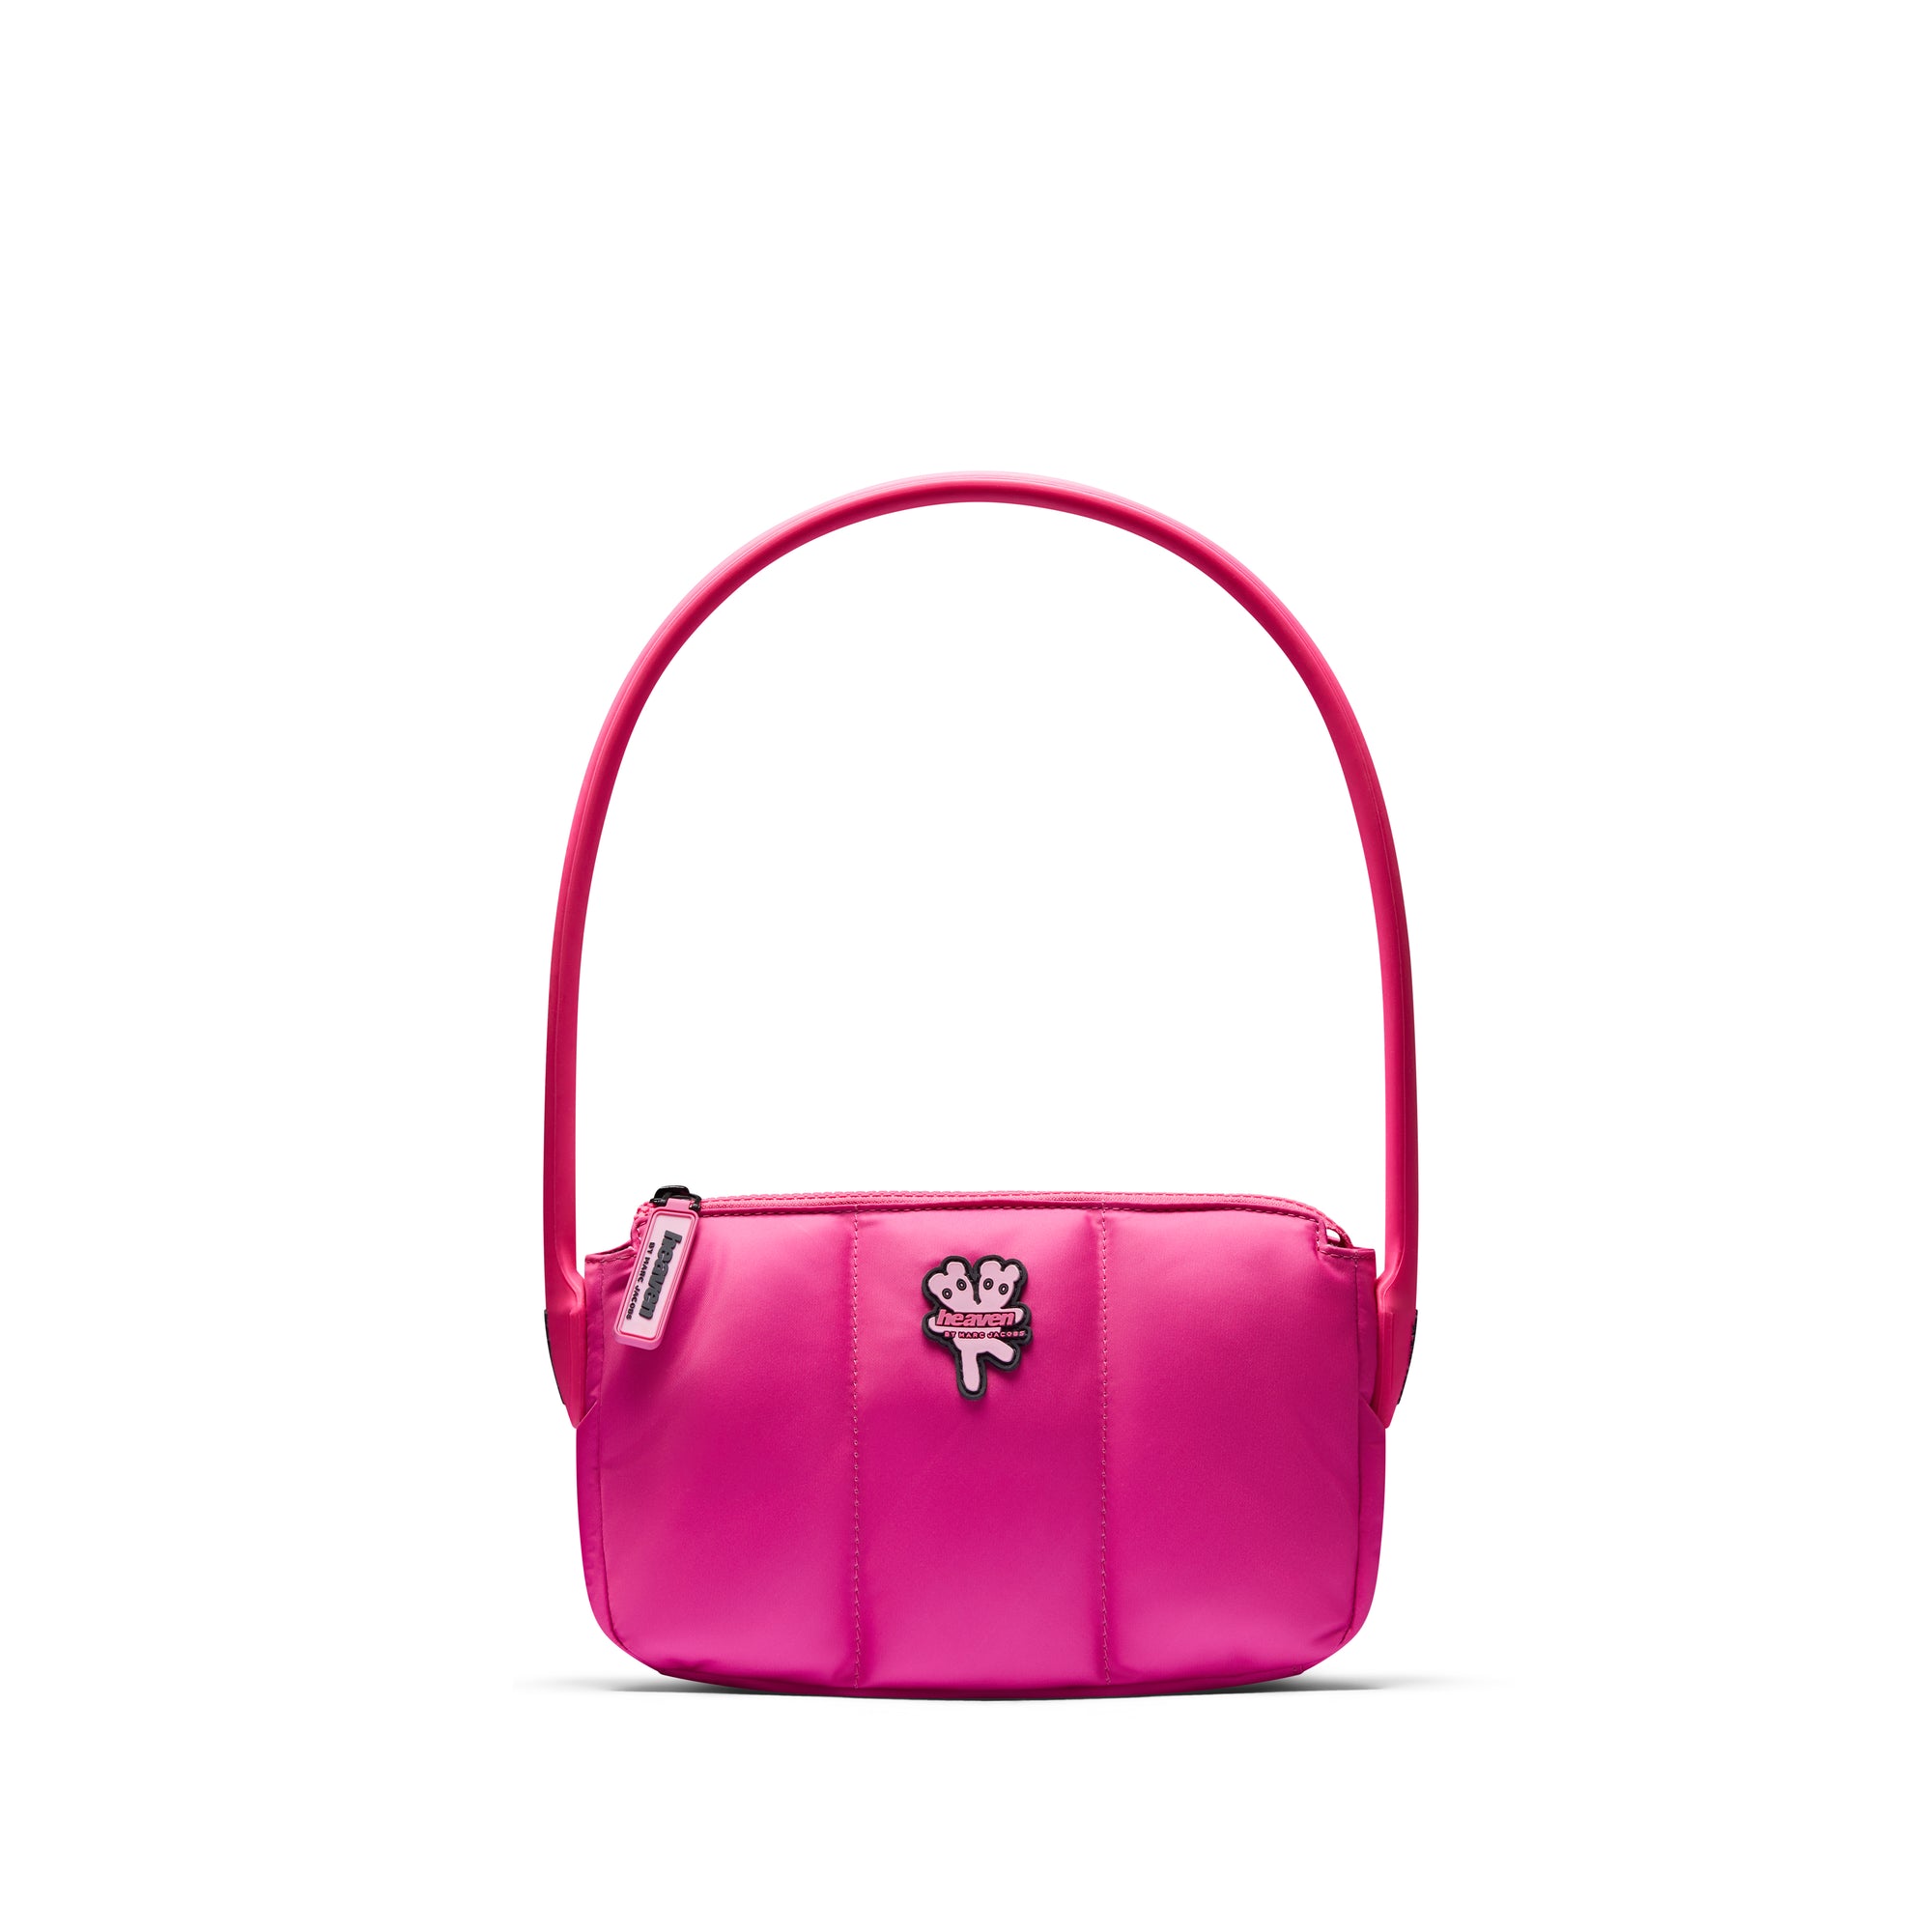 Heaven By Marc Jacobs - Women’s Shoulder Bag - (Hot Pink) view 1